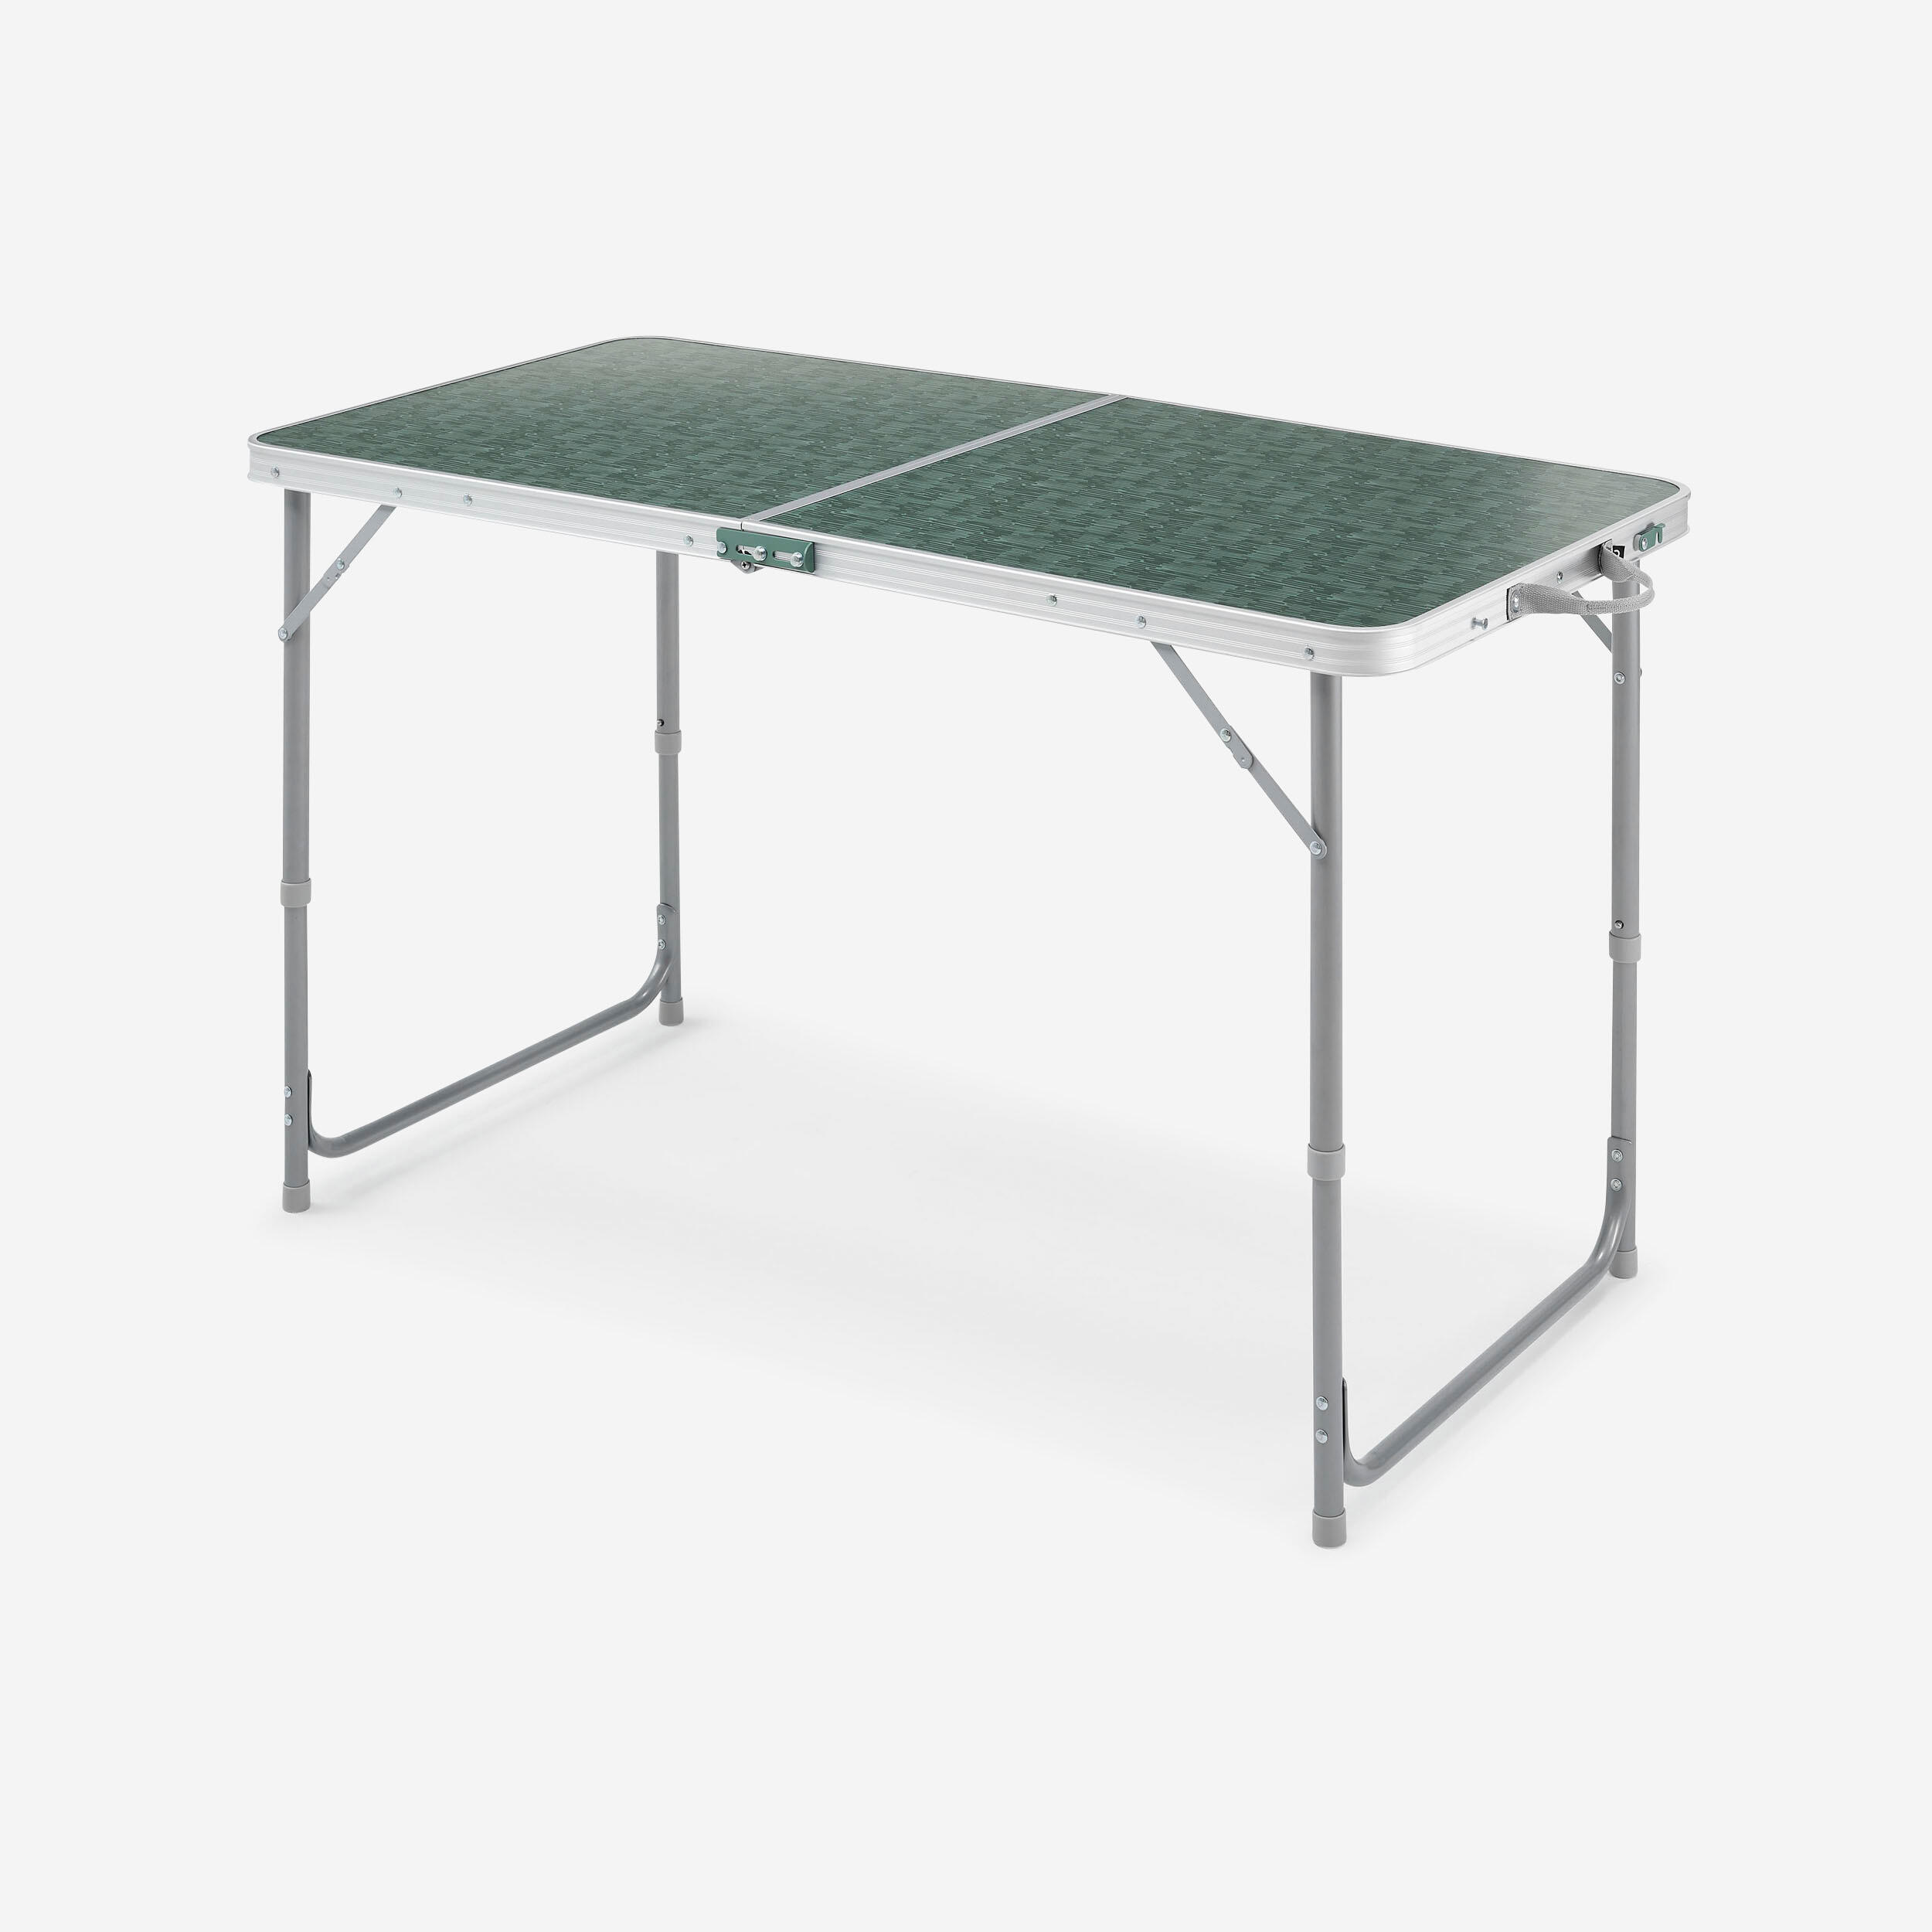 FOLDING CAMPING TABLE - 4 TO 6 PEOPLE 1/12